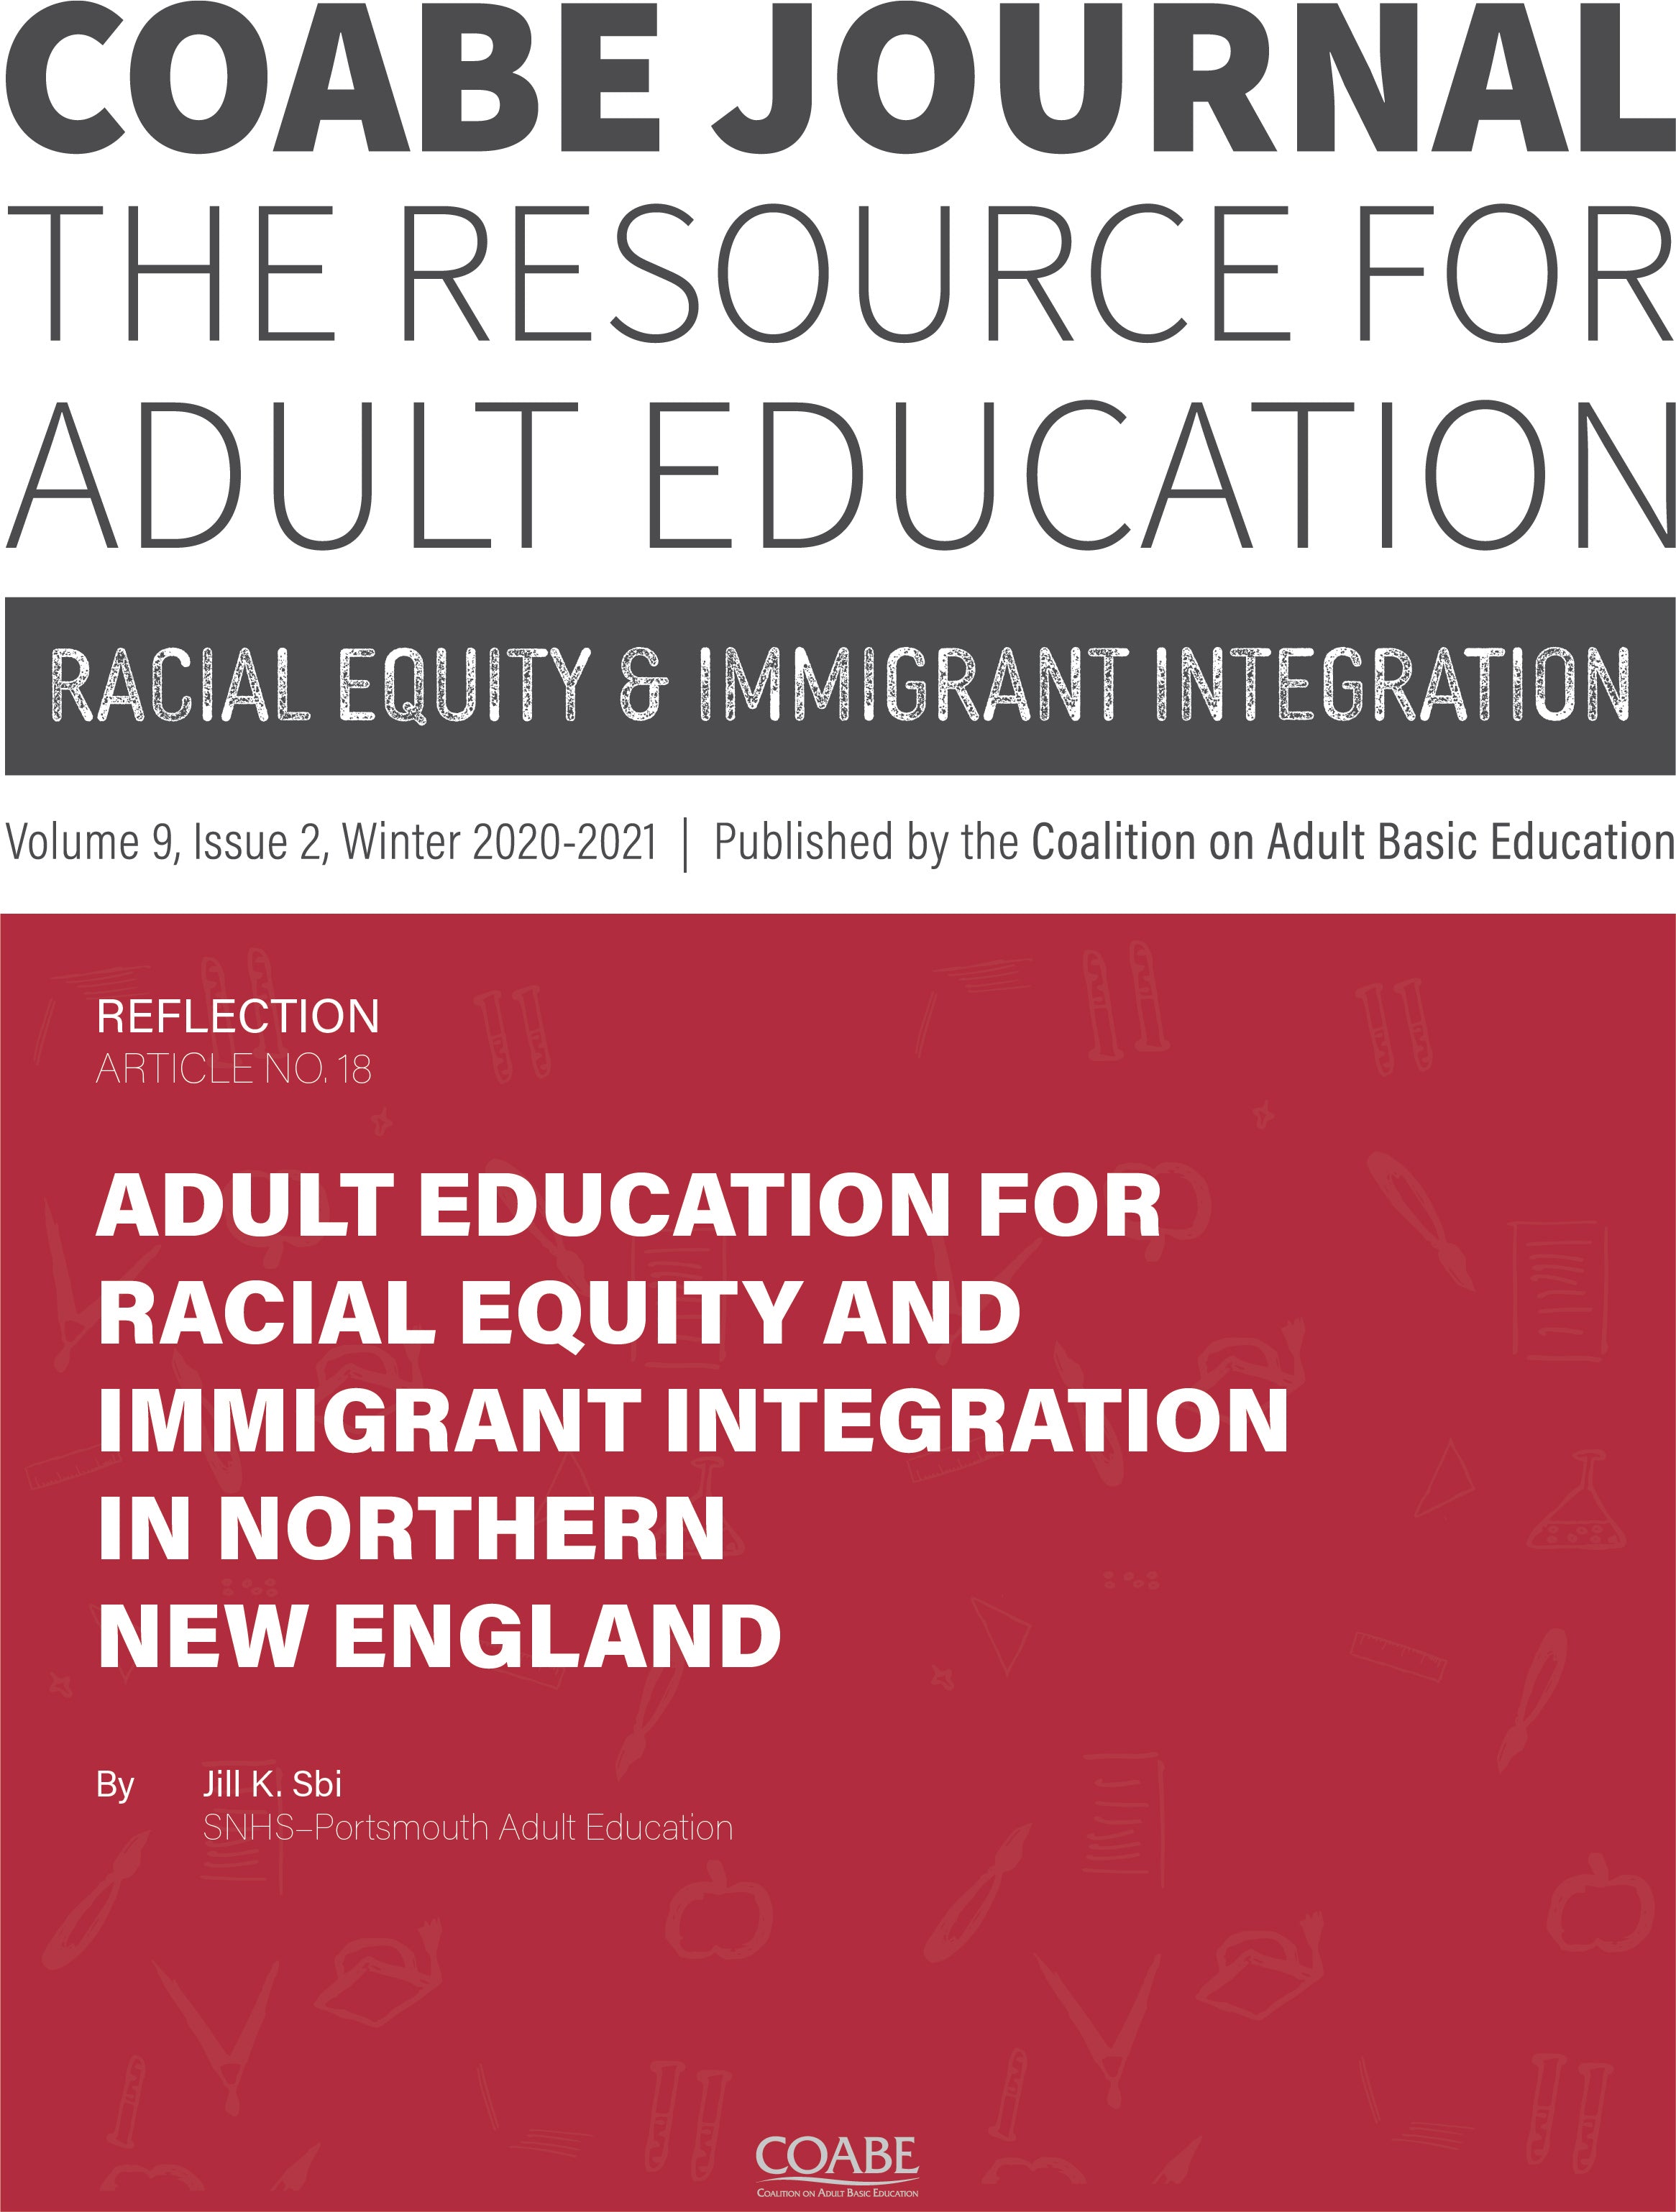 Article 18 / Adult Education for Racial Equity and Immigrant Integration in Northern New England